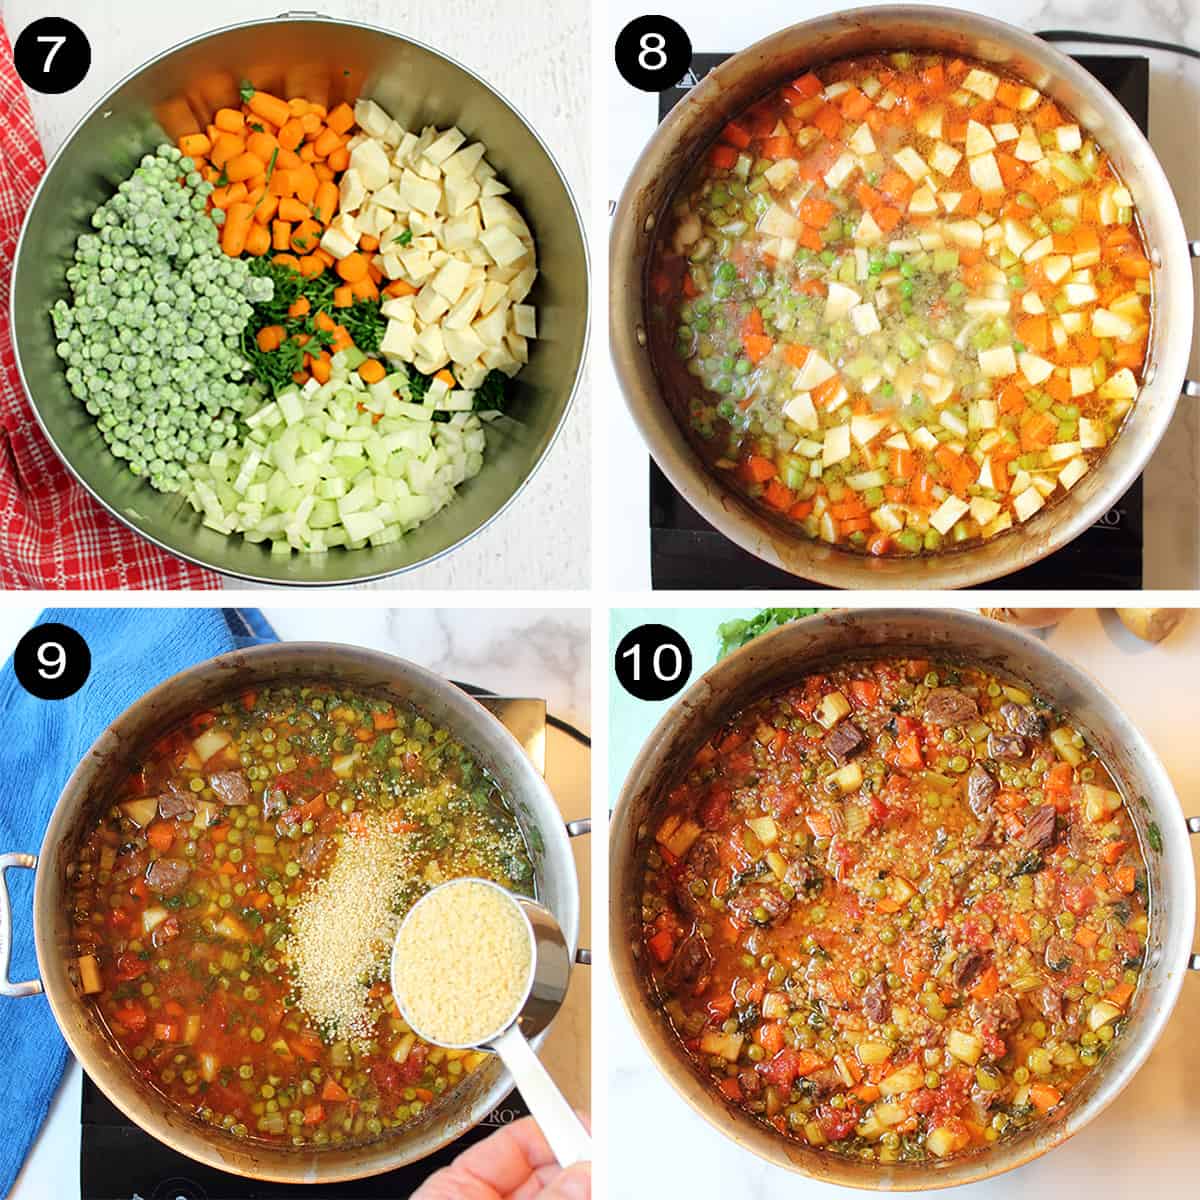 Collage of steps 7-10, adding vegetables and pasta.